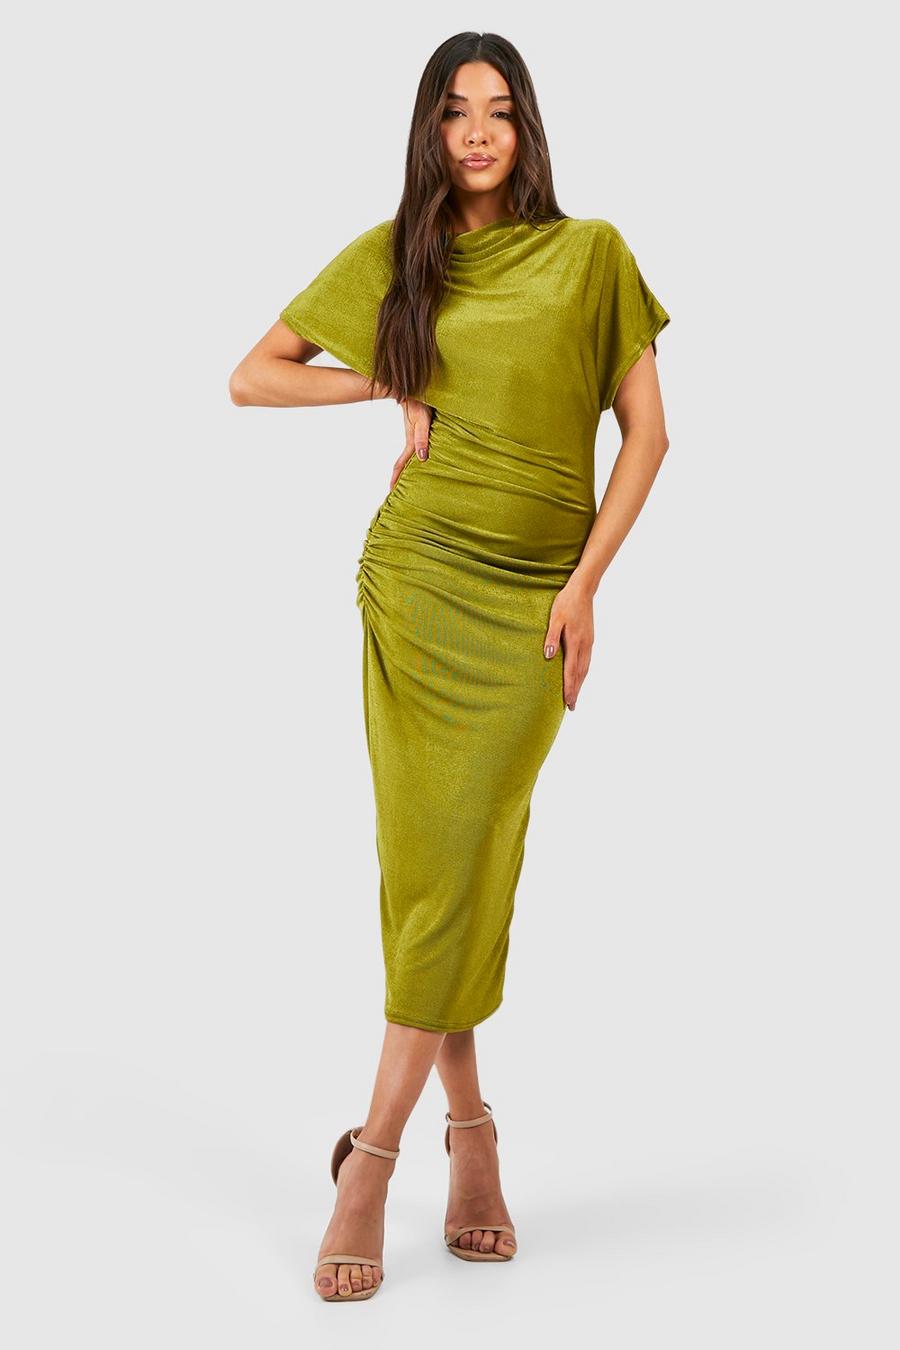 Khaki High Neck Ruched Acetate Slinky Midaxi Dress image number 1